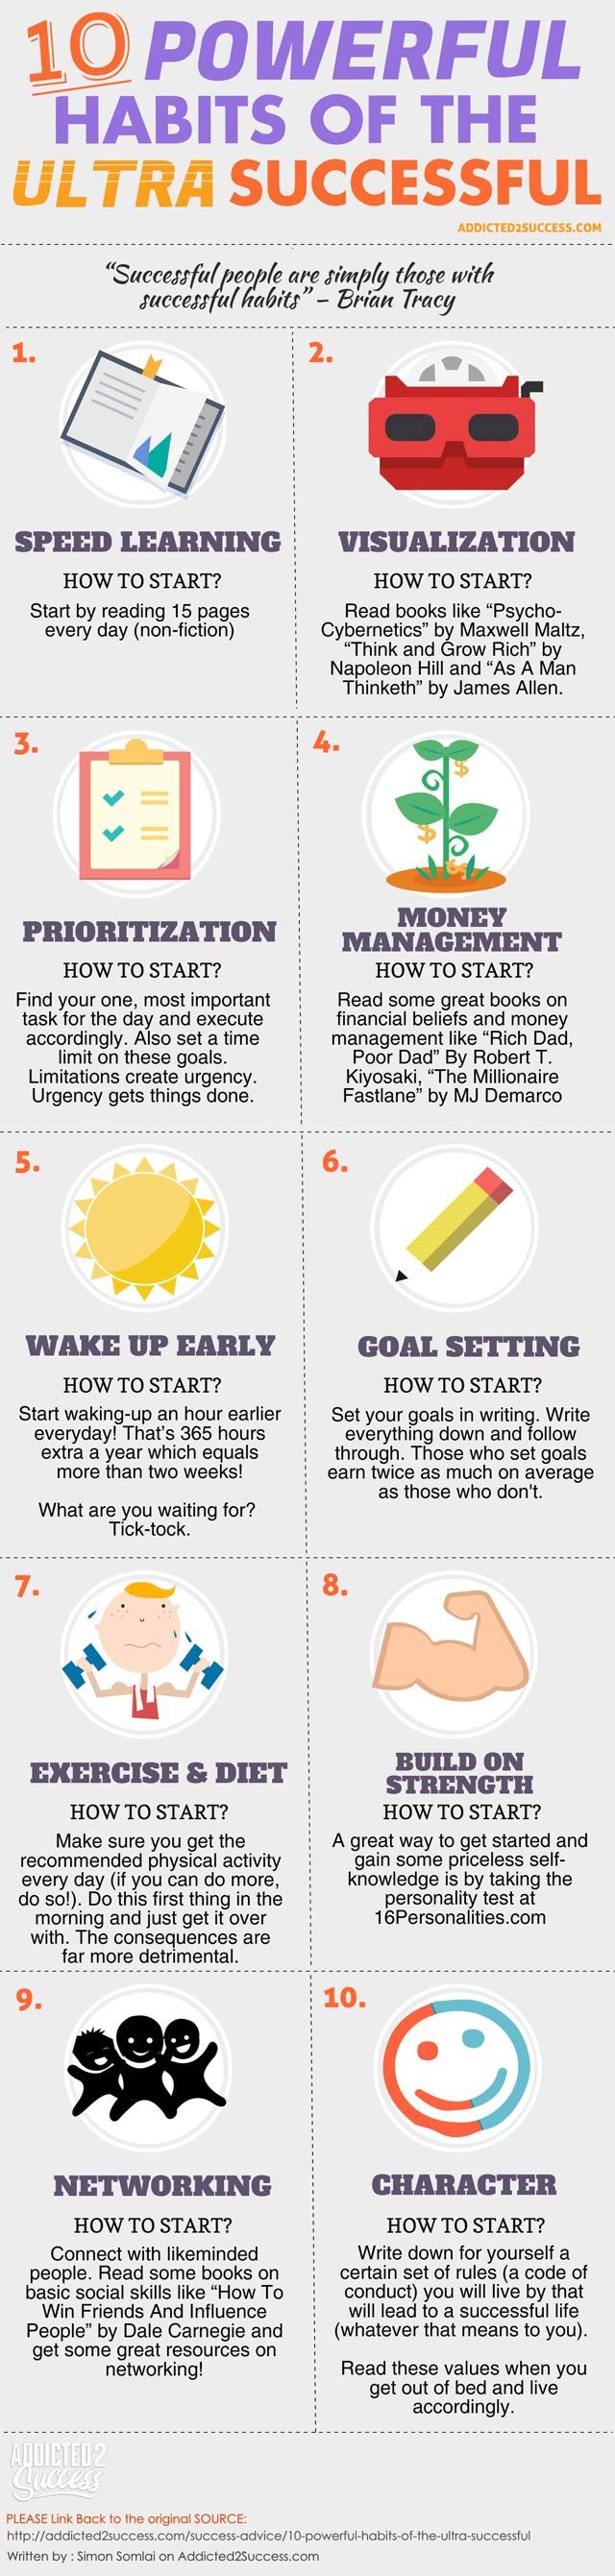 10 Powerful Habits Of The Ultra Successful [Infographic]